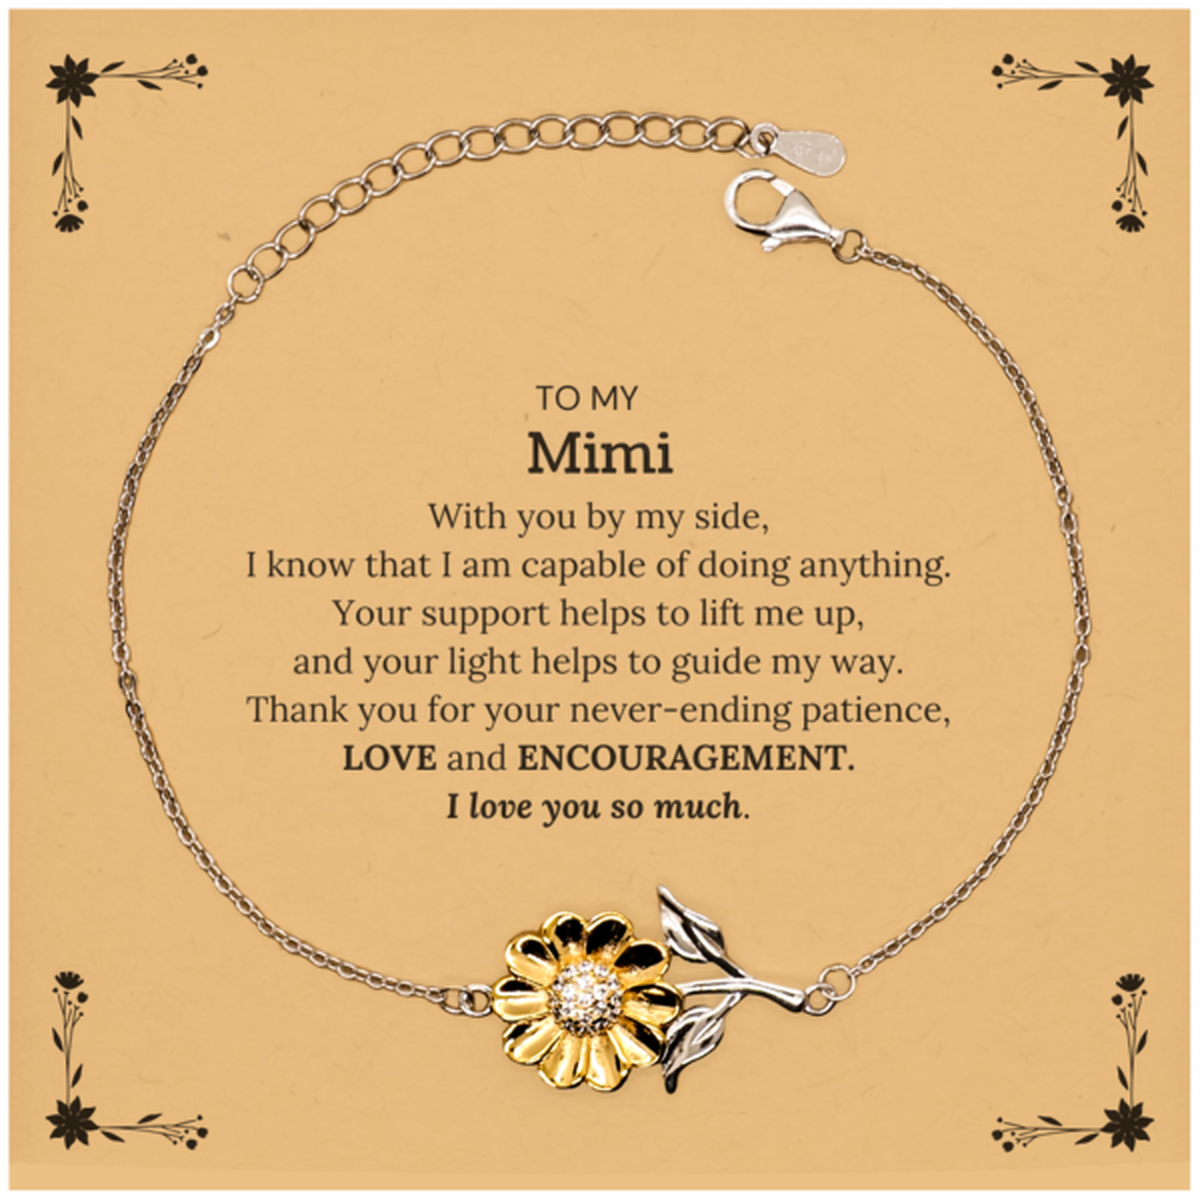 Appreciation Mimi Sunflower Bracelet Gifts, To My Mimi Birthday Christmas Wedding Keepsake Gifts for Mimi With you by my side, I know that I am capable of doing anything. I love you so much